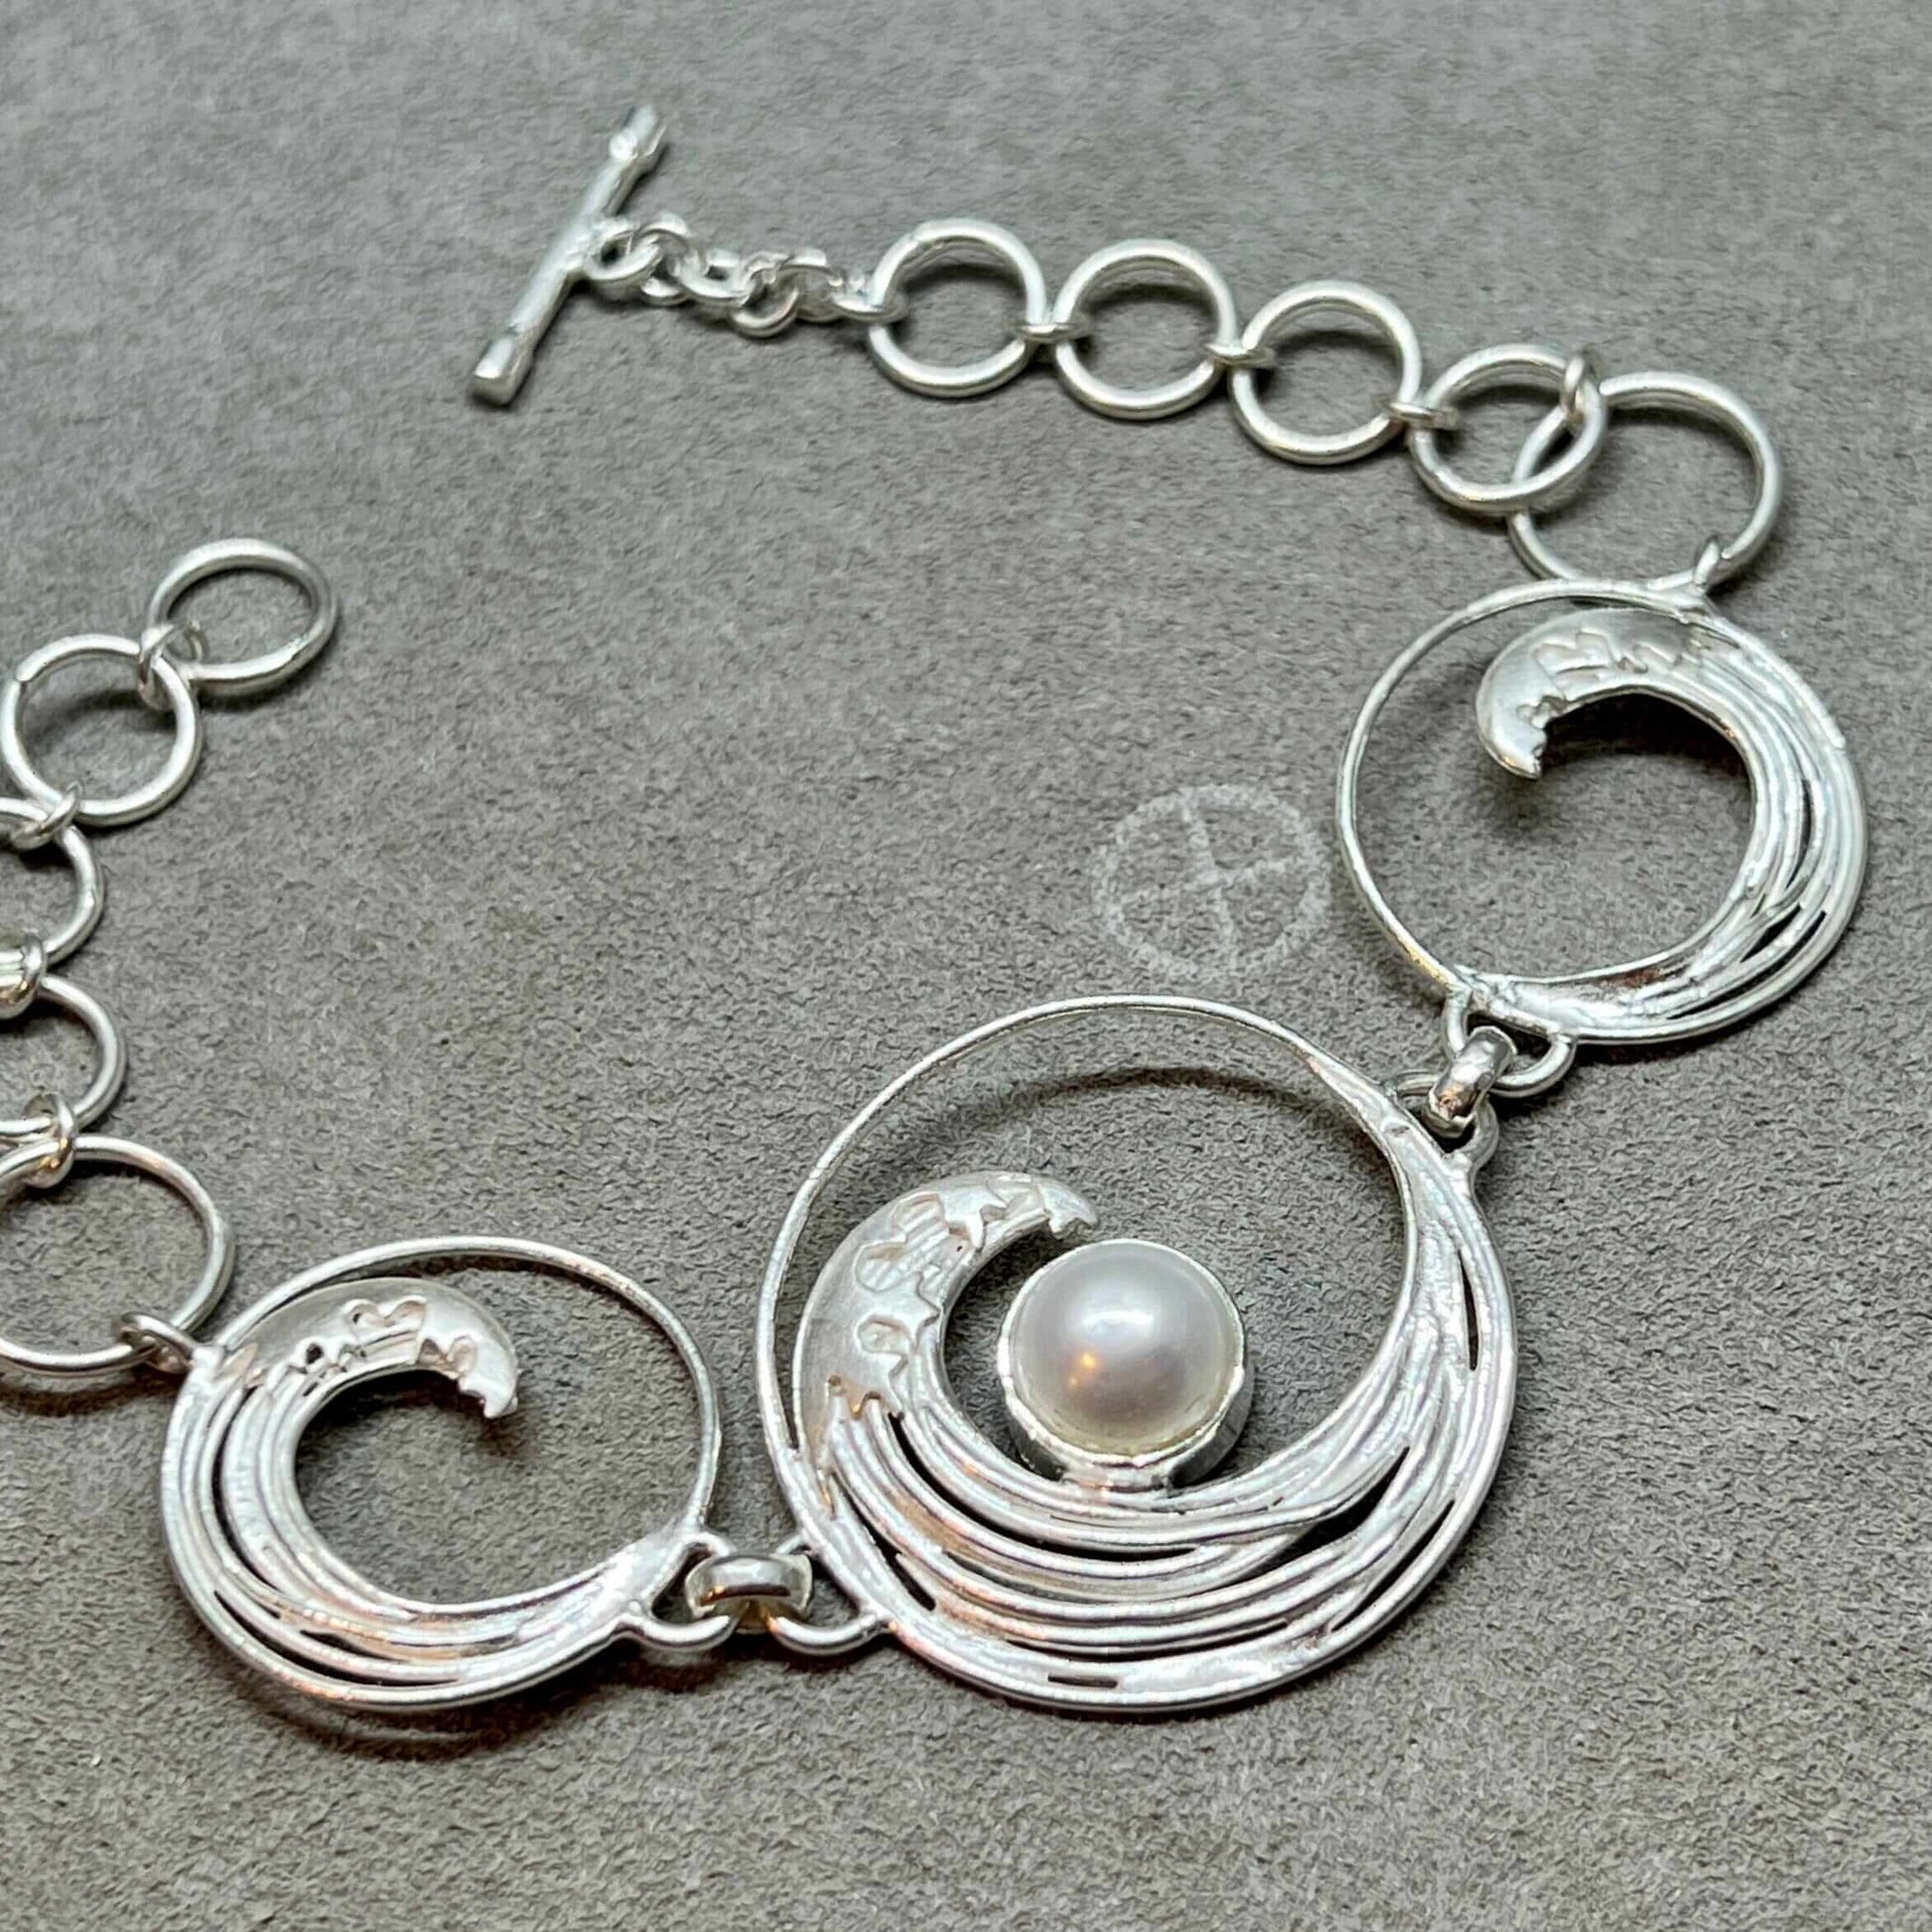 Japanese Inspired Hokusai The Great Wave Sterling Silver Bracelet By Paula Bolton - Twelve Silver Trees